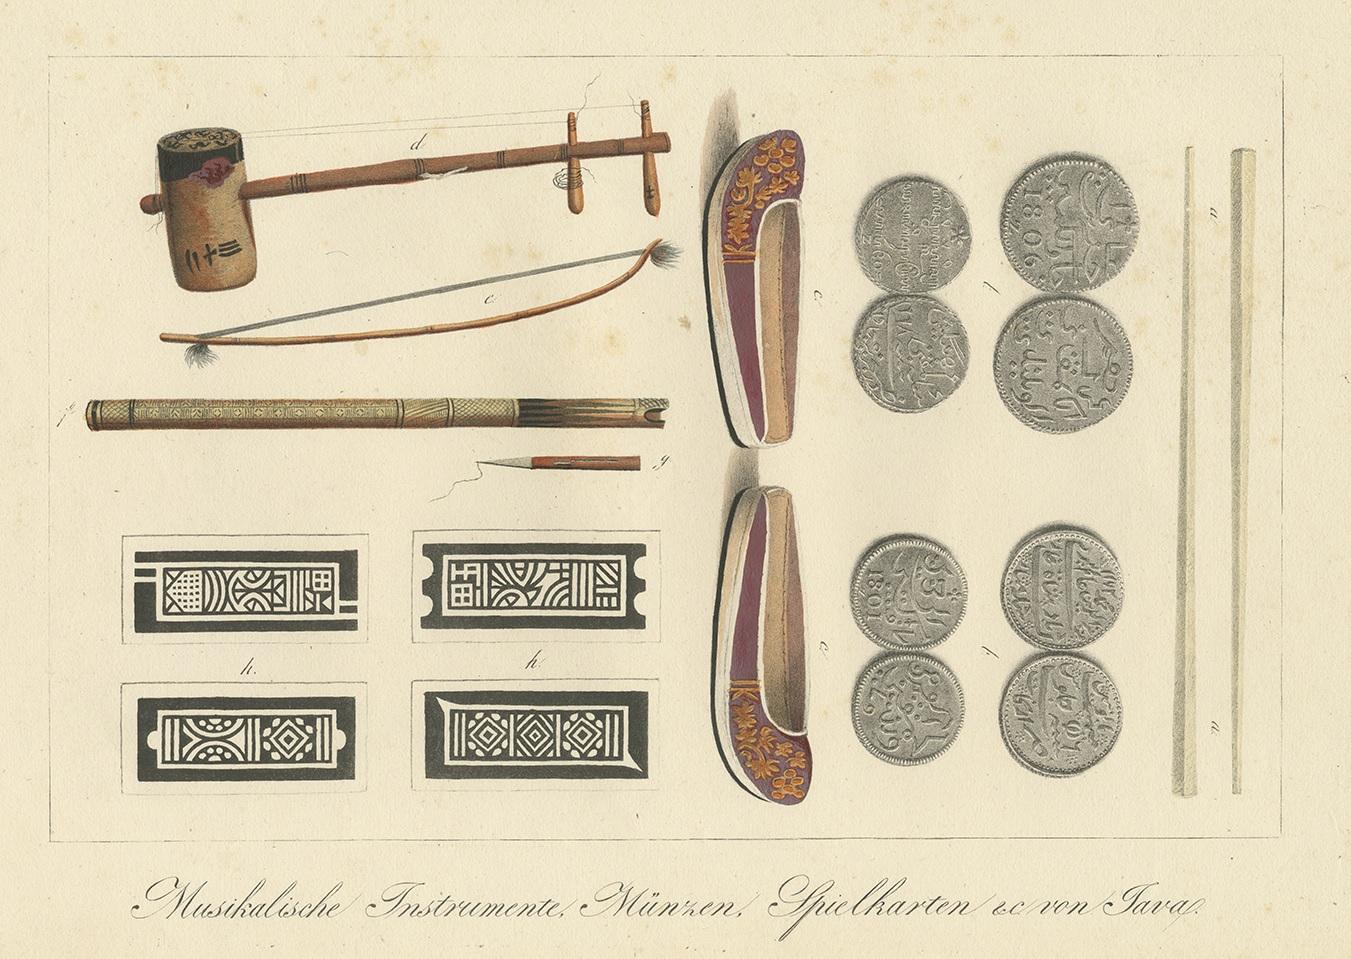 Antique print titled 'Musikalische Instrumente, Münzen, Spielkarten & c von Java'. Uncommon engraving of musical instruments, coins, playing cards and other items of Java, Indonesia. Shows; a: Ivory chopsticks; b: coins; c: Tjenella (slippers); d: